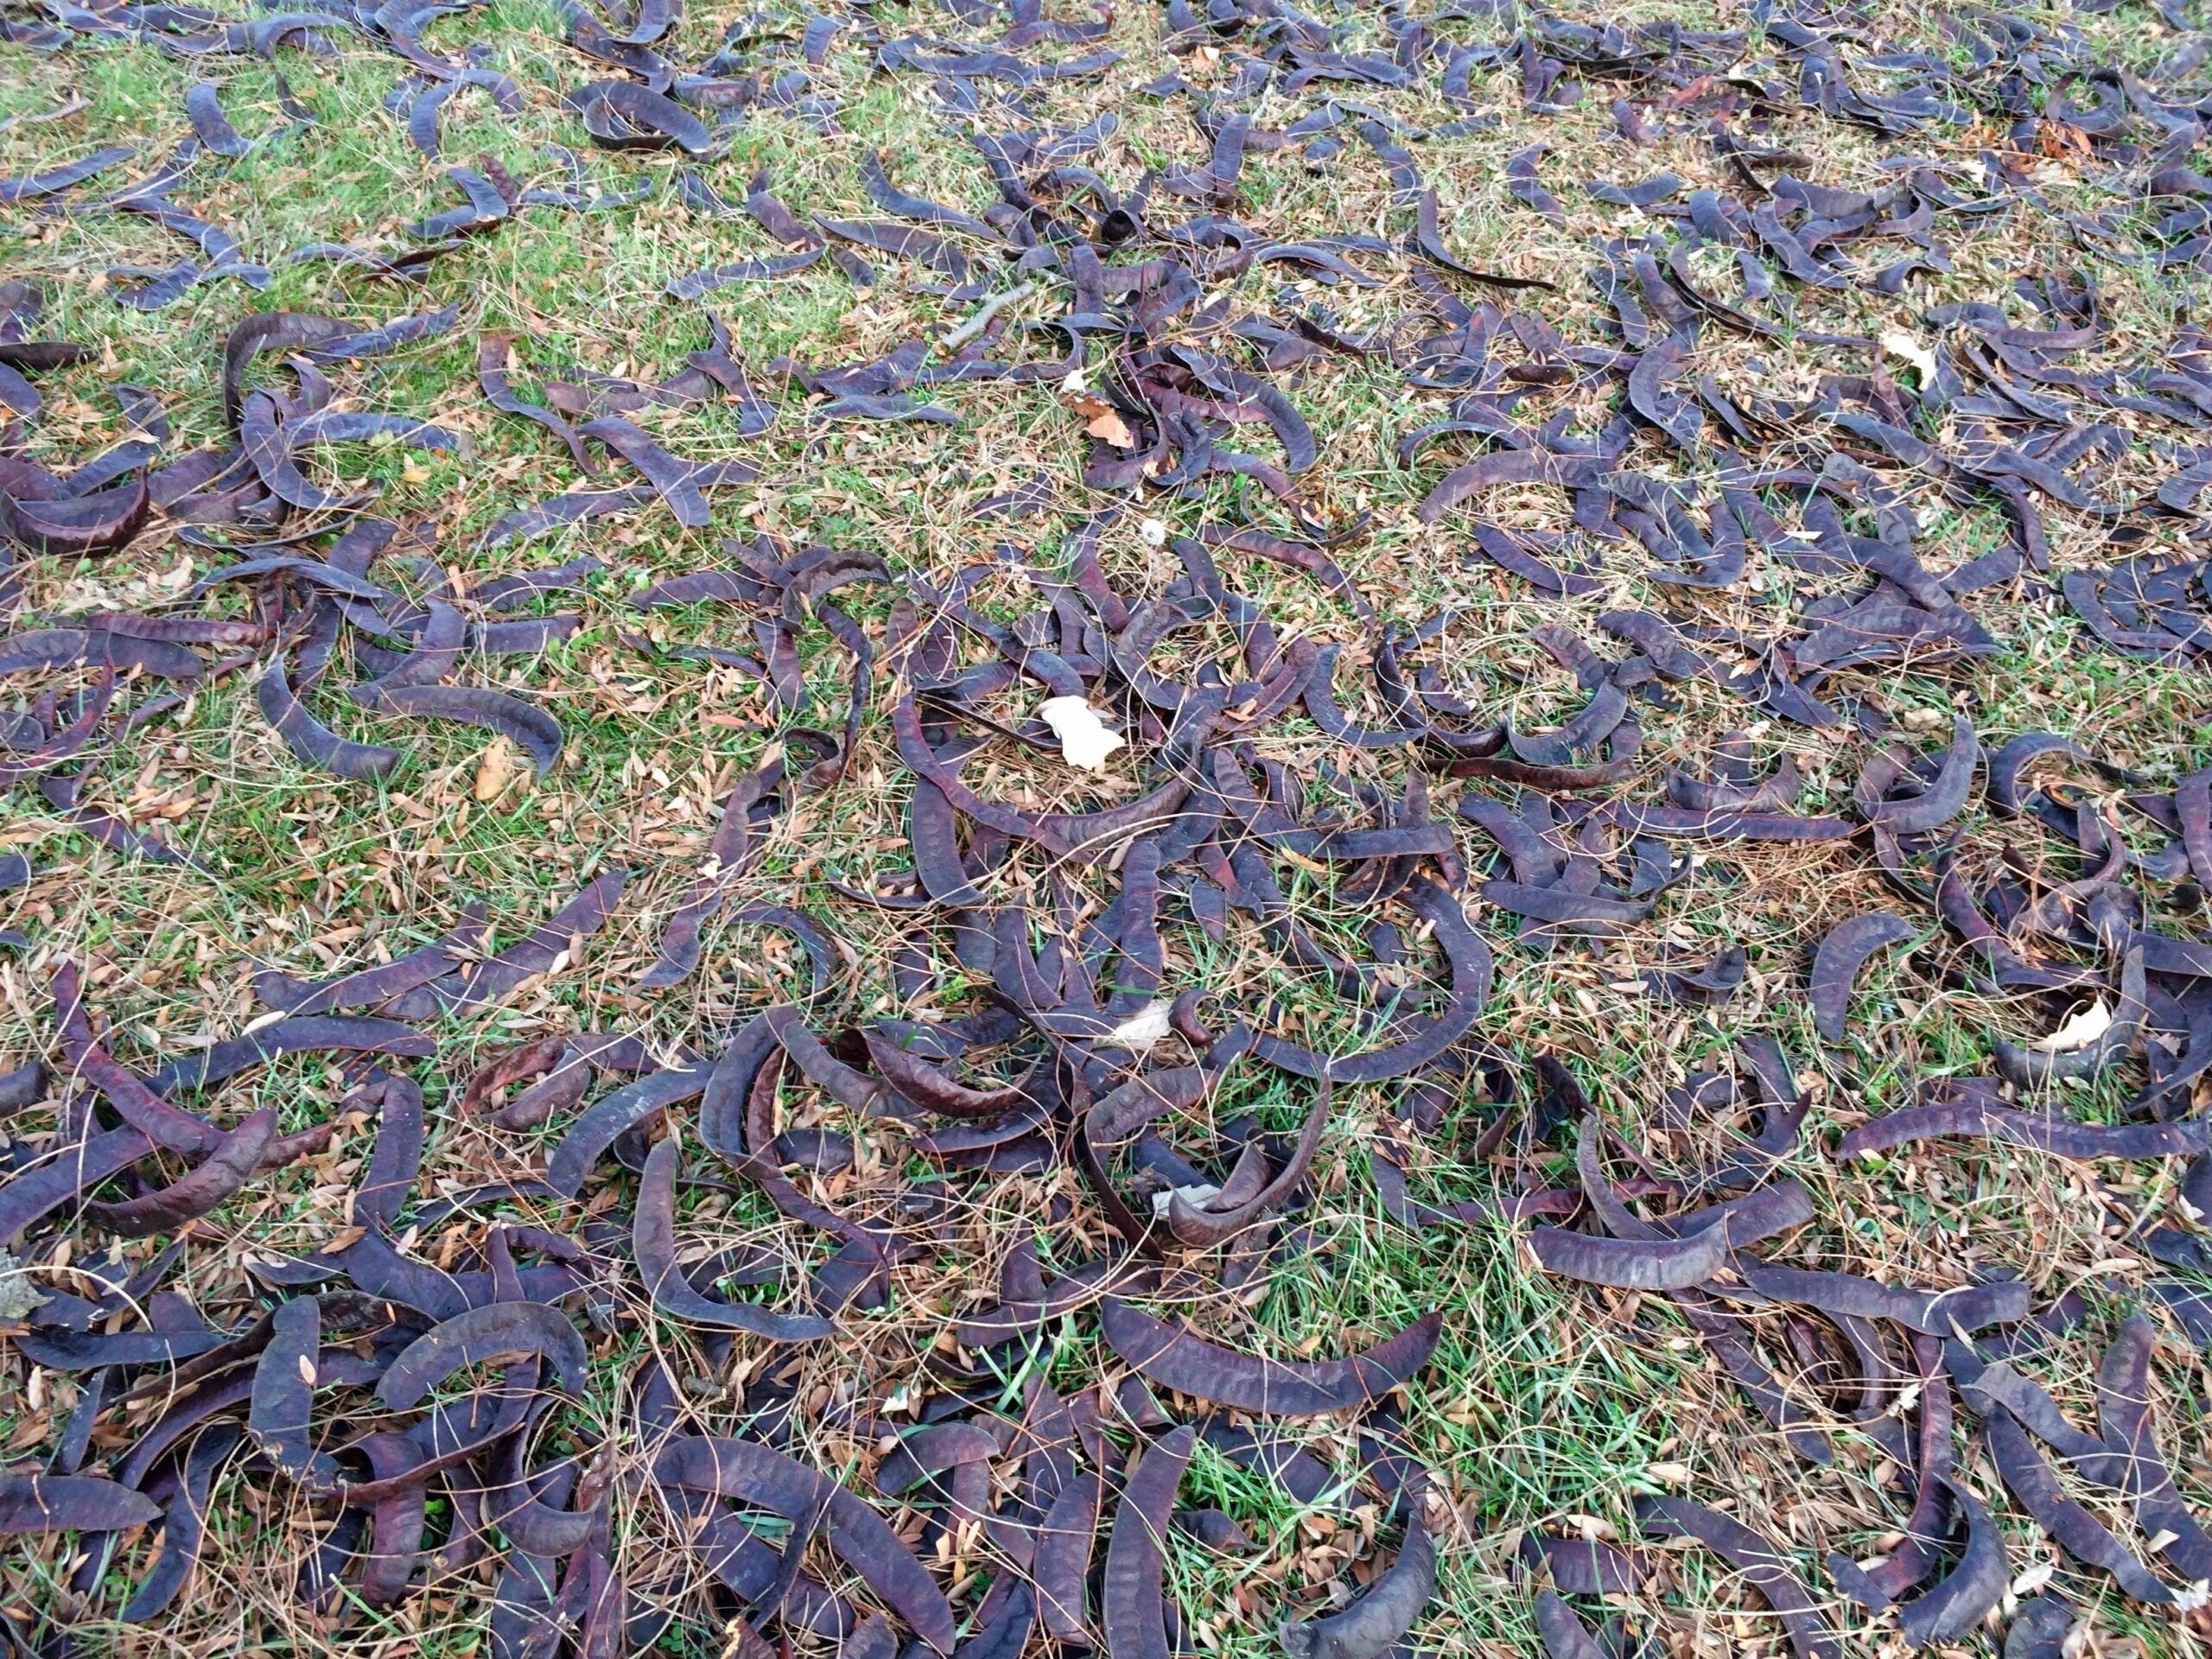 Honey locust seed pods strewn over the ground